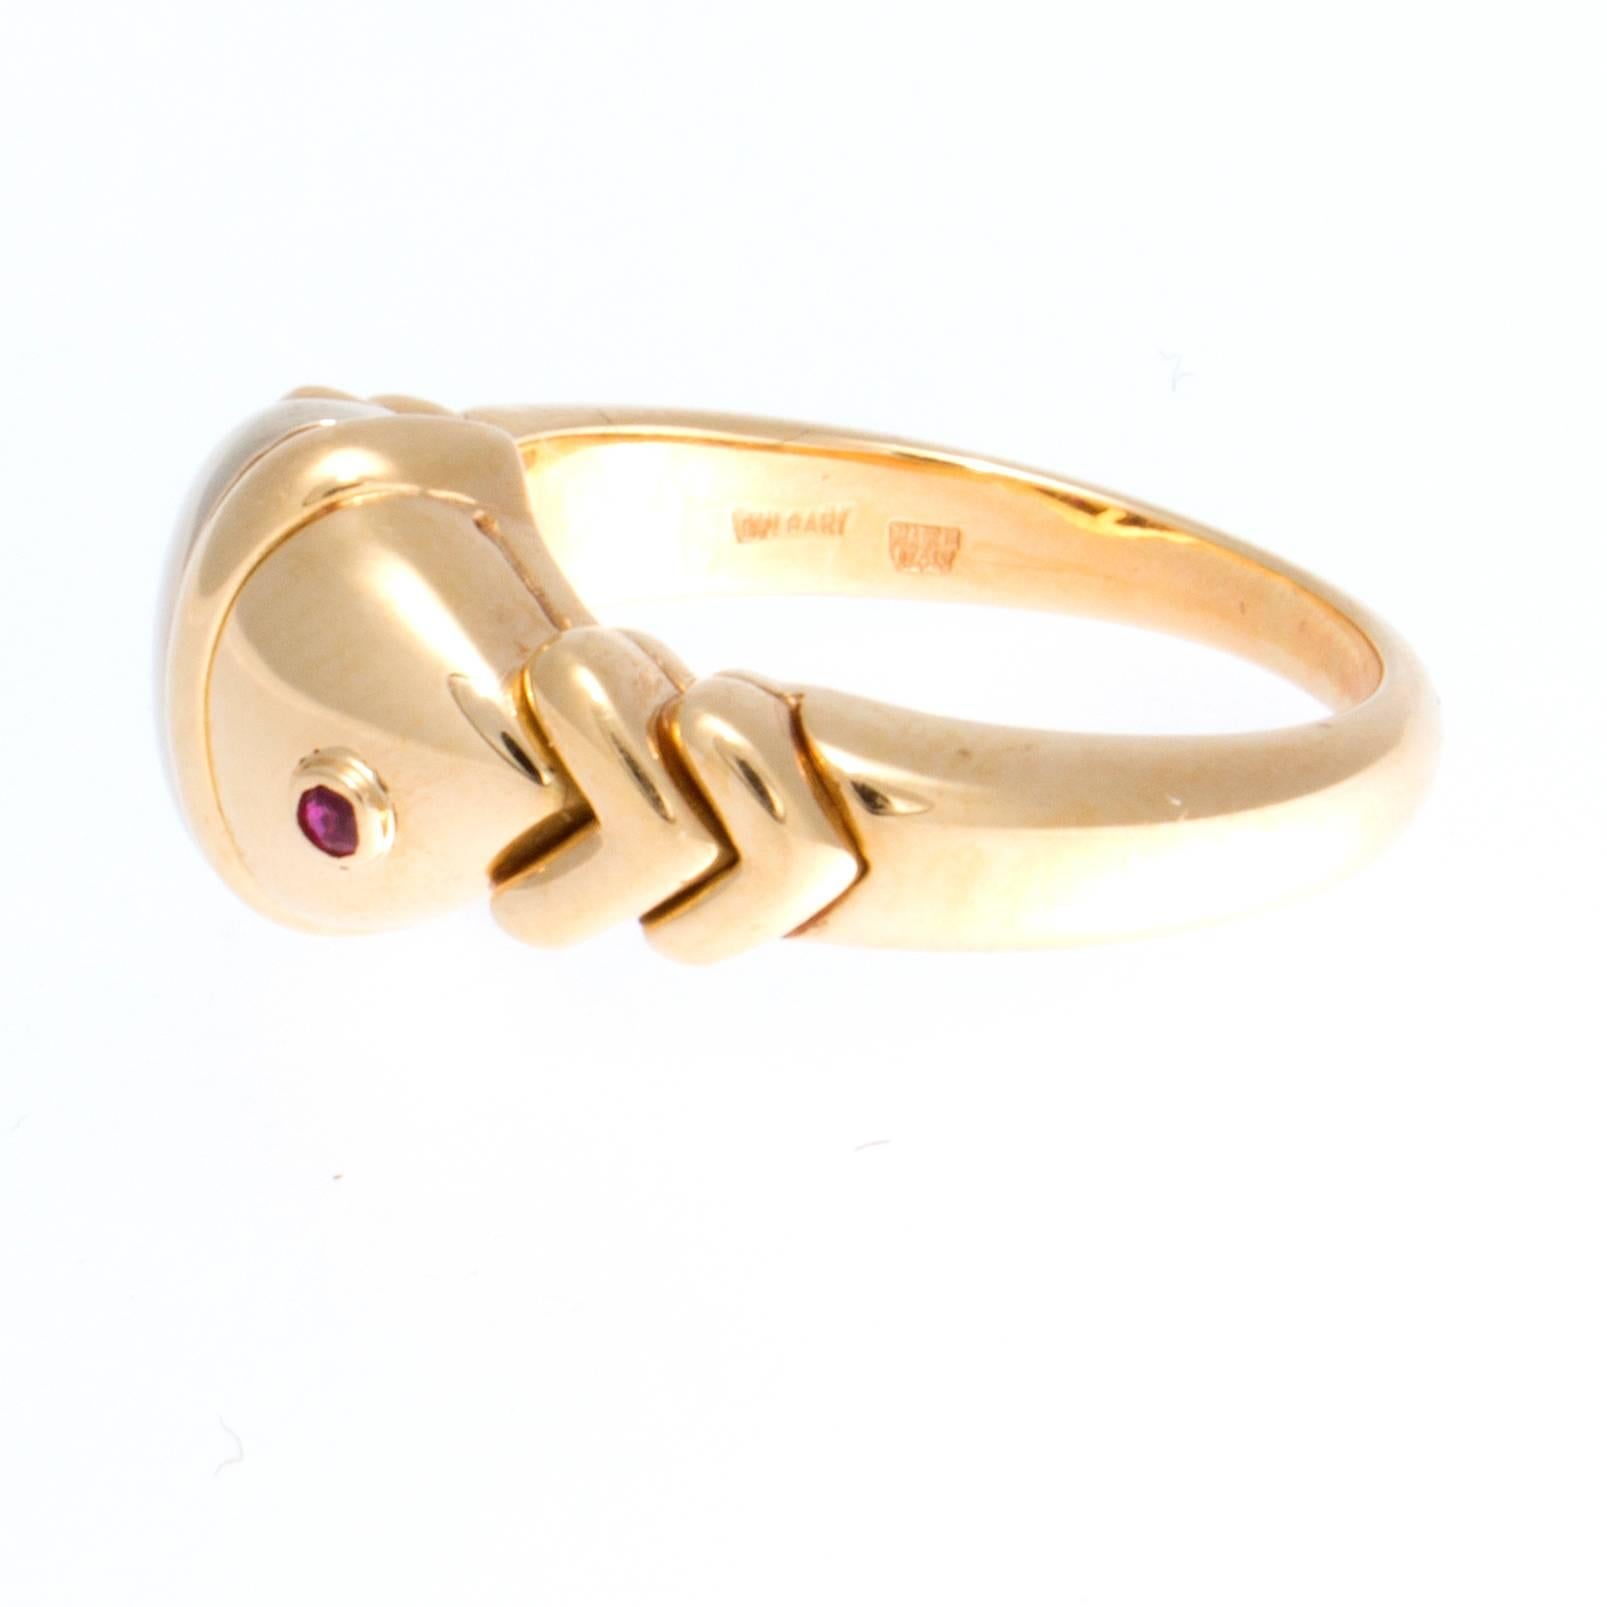 Stylish and colorful from Bulgari. Designed in 18k gold featuring a single red ruby. Signed Bvlgari. Ring size 6-3/4 and may be resized.
